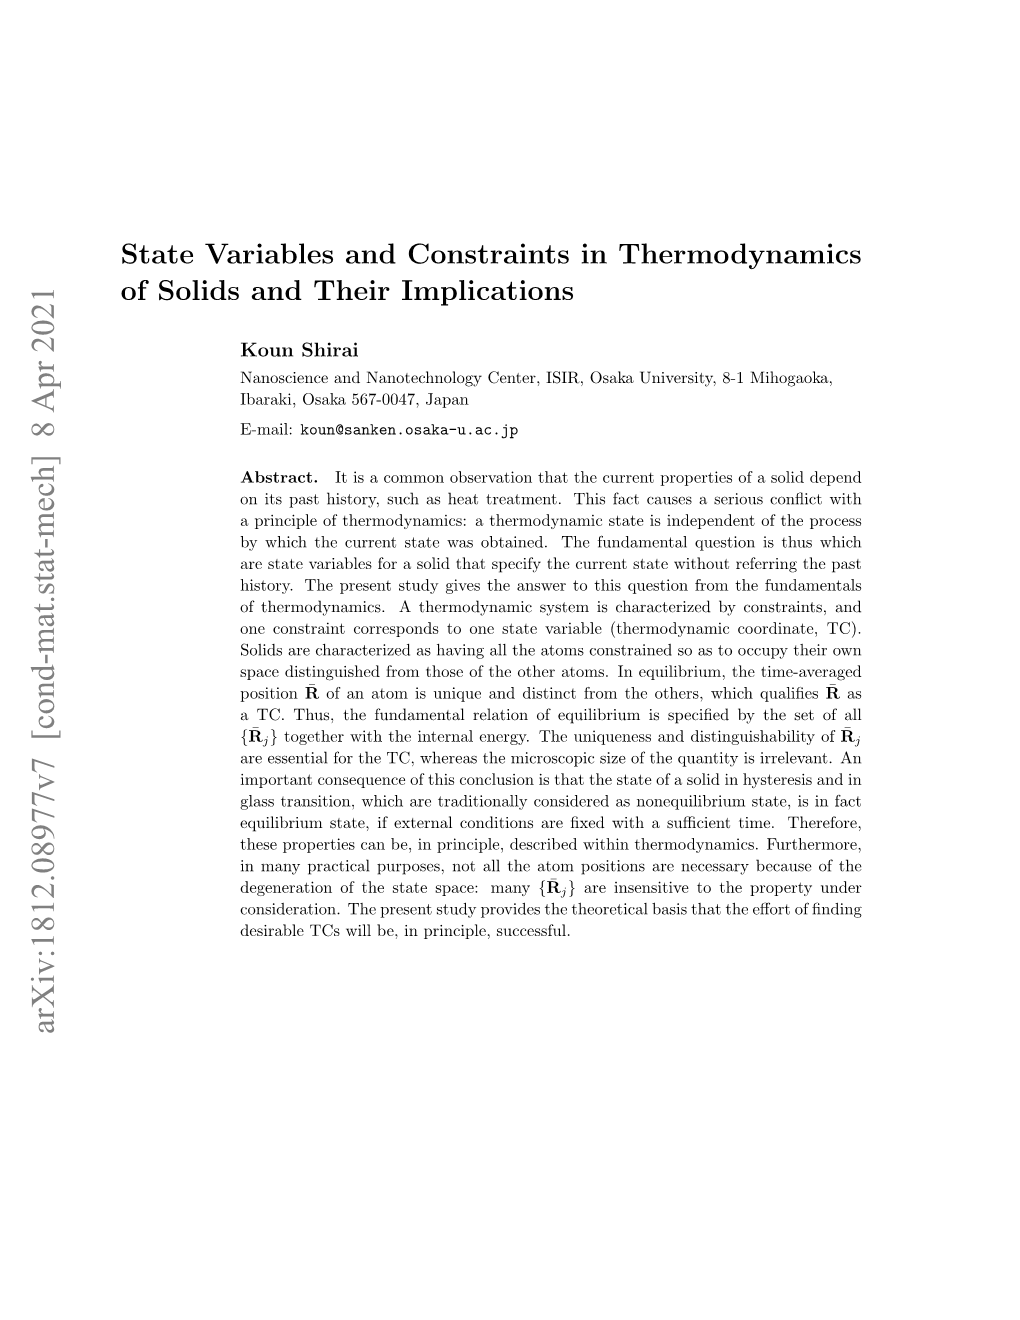 State Variables and Constraints in Thermodynamics of Solids and Their Implications